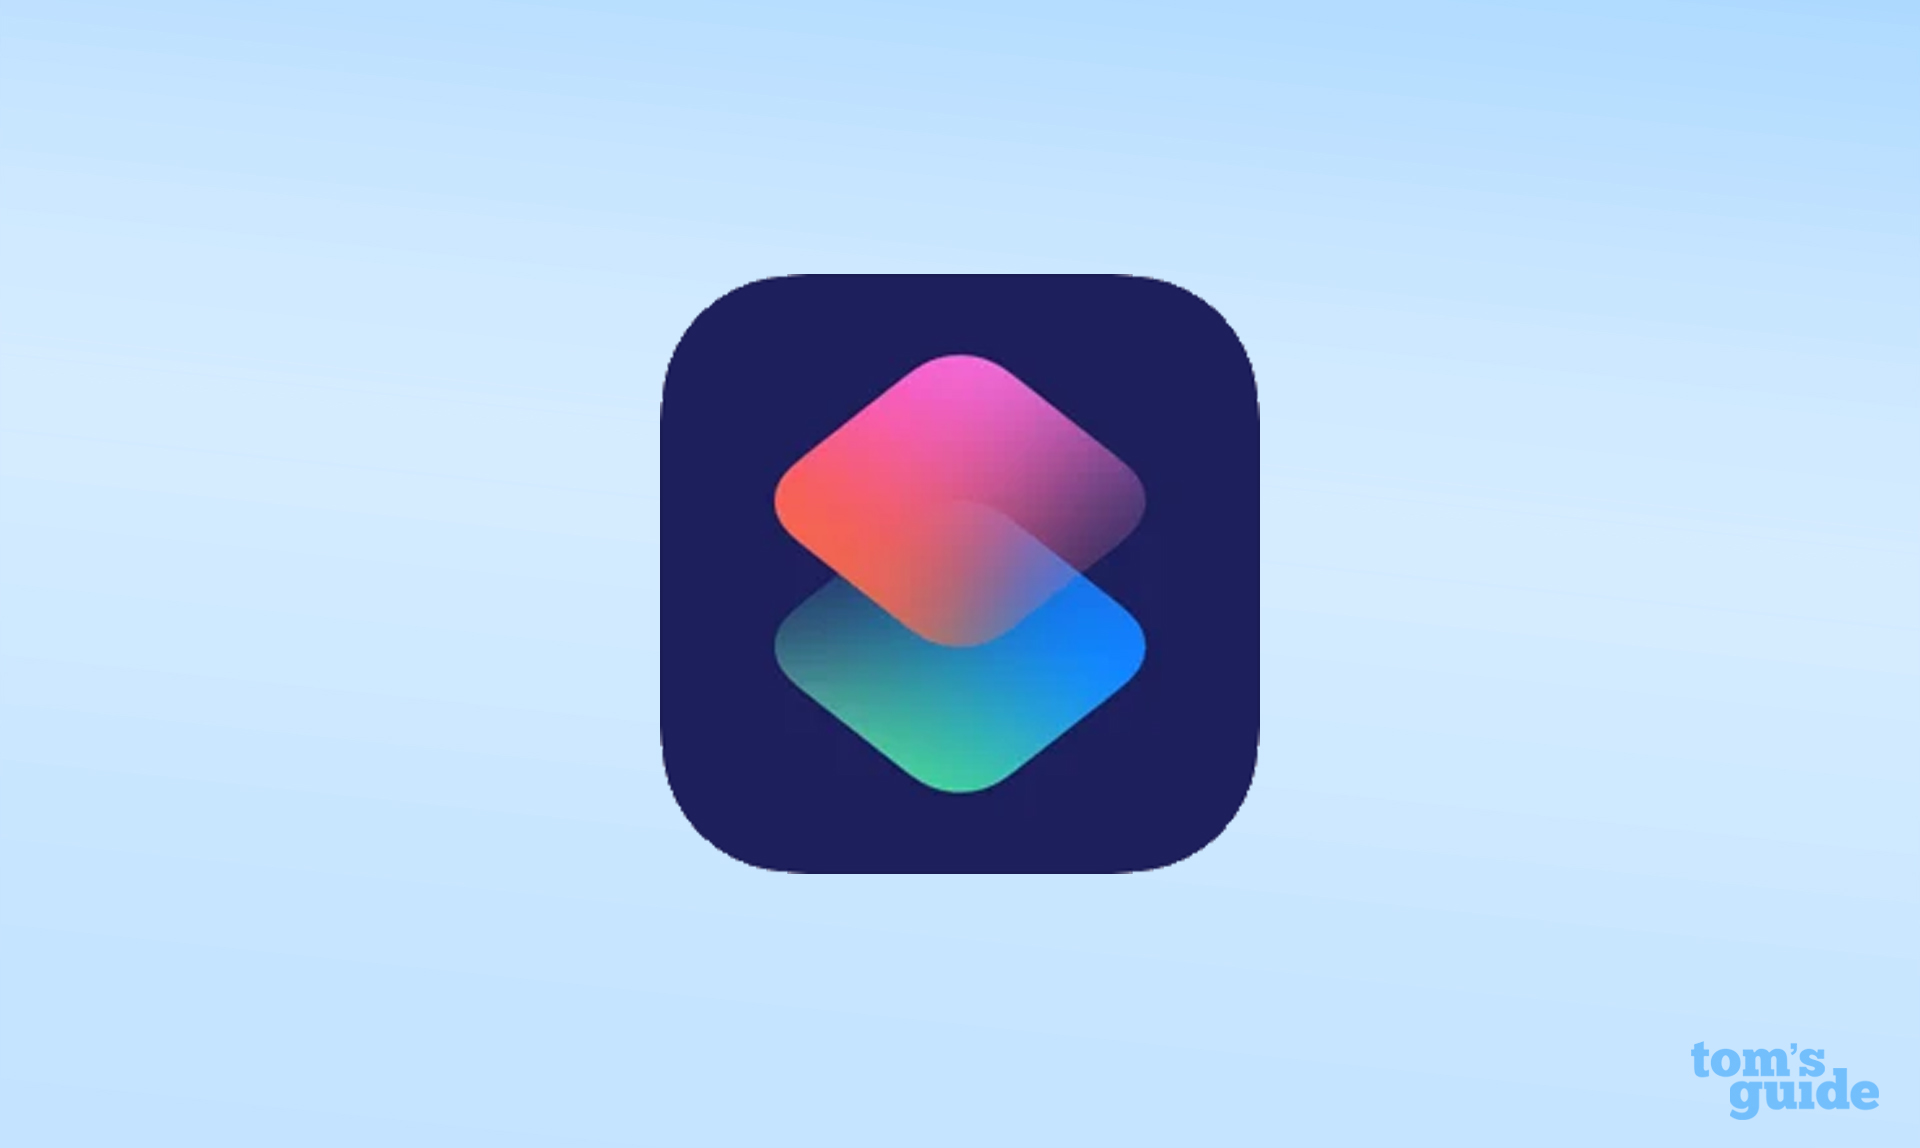 The logo for the iOS Shortcuts app